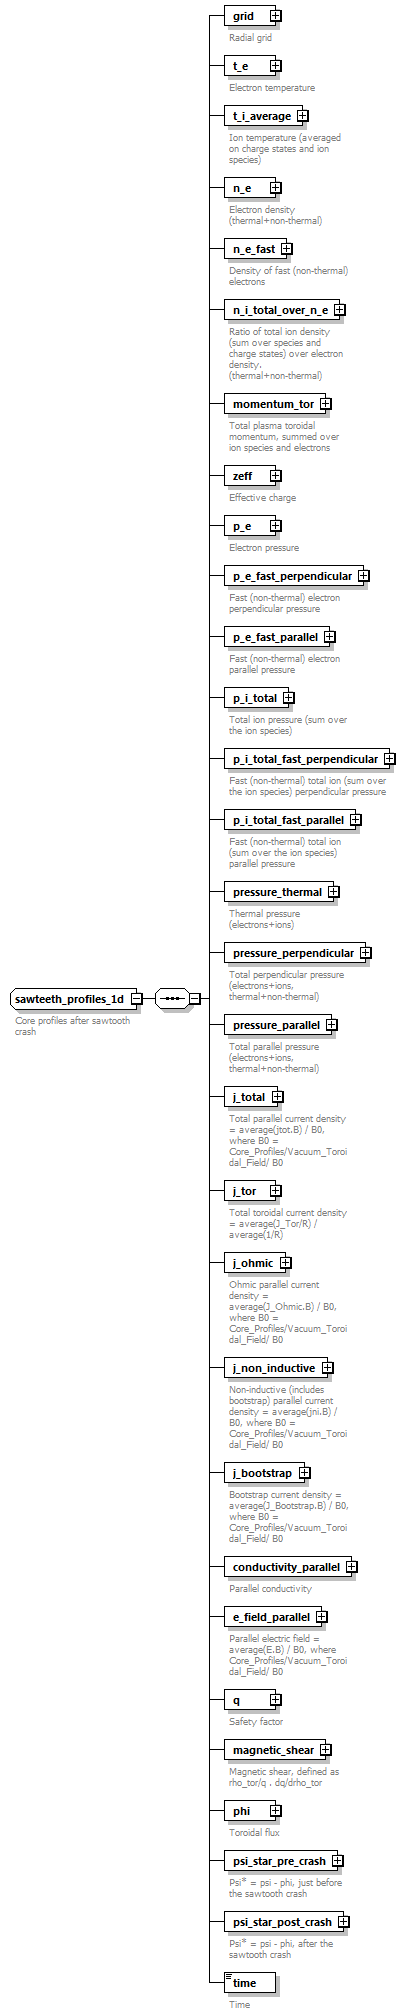 dd_physics_data_dictionary_p2330.png